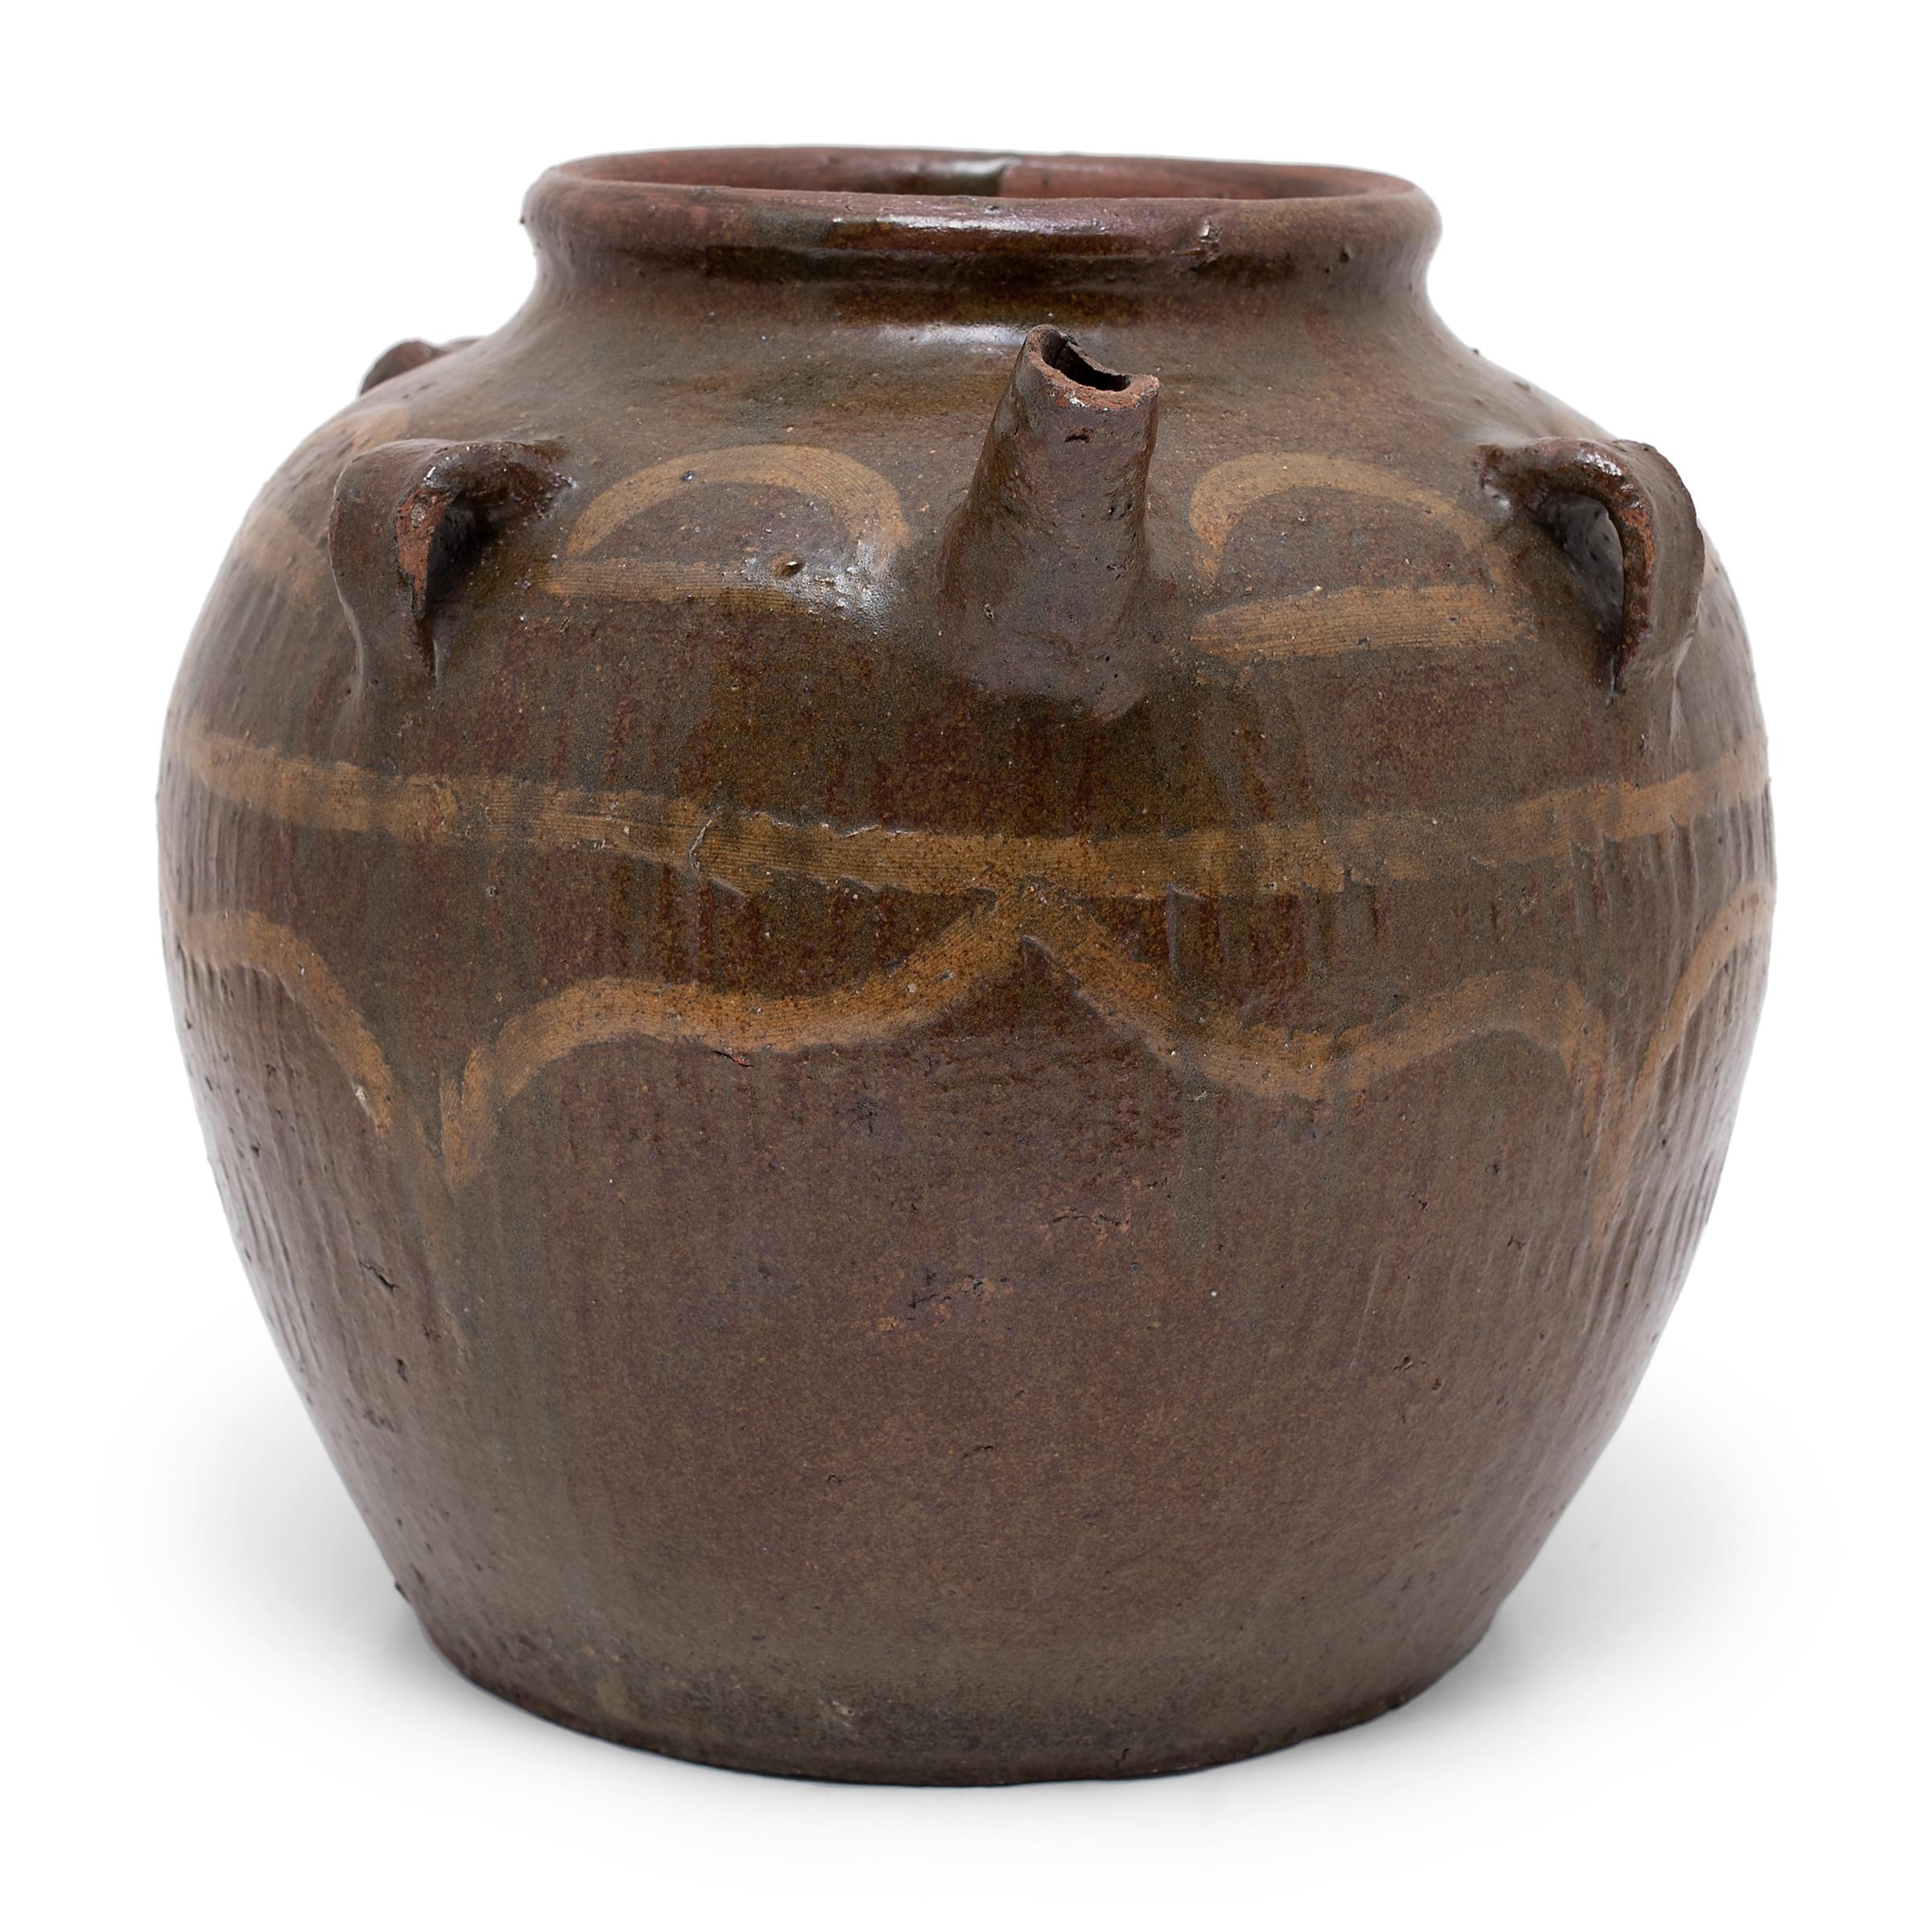 This 19th-century kitchen vessel is coated inside and out with a dark brown glaze that clings to its ribbed sides with subtle color variation. Designed for serving water or tea, the squat jar features a narrow neck, small strap handles, and a short